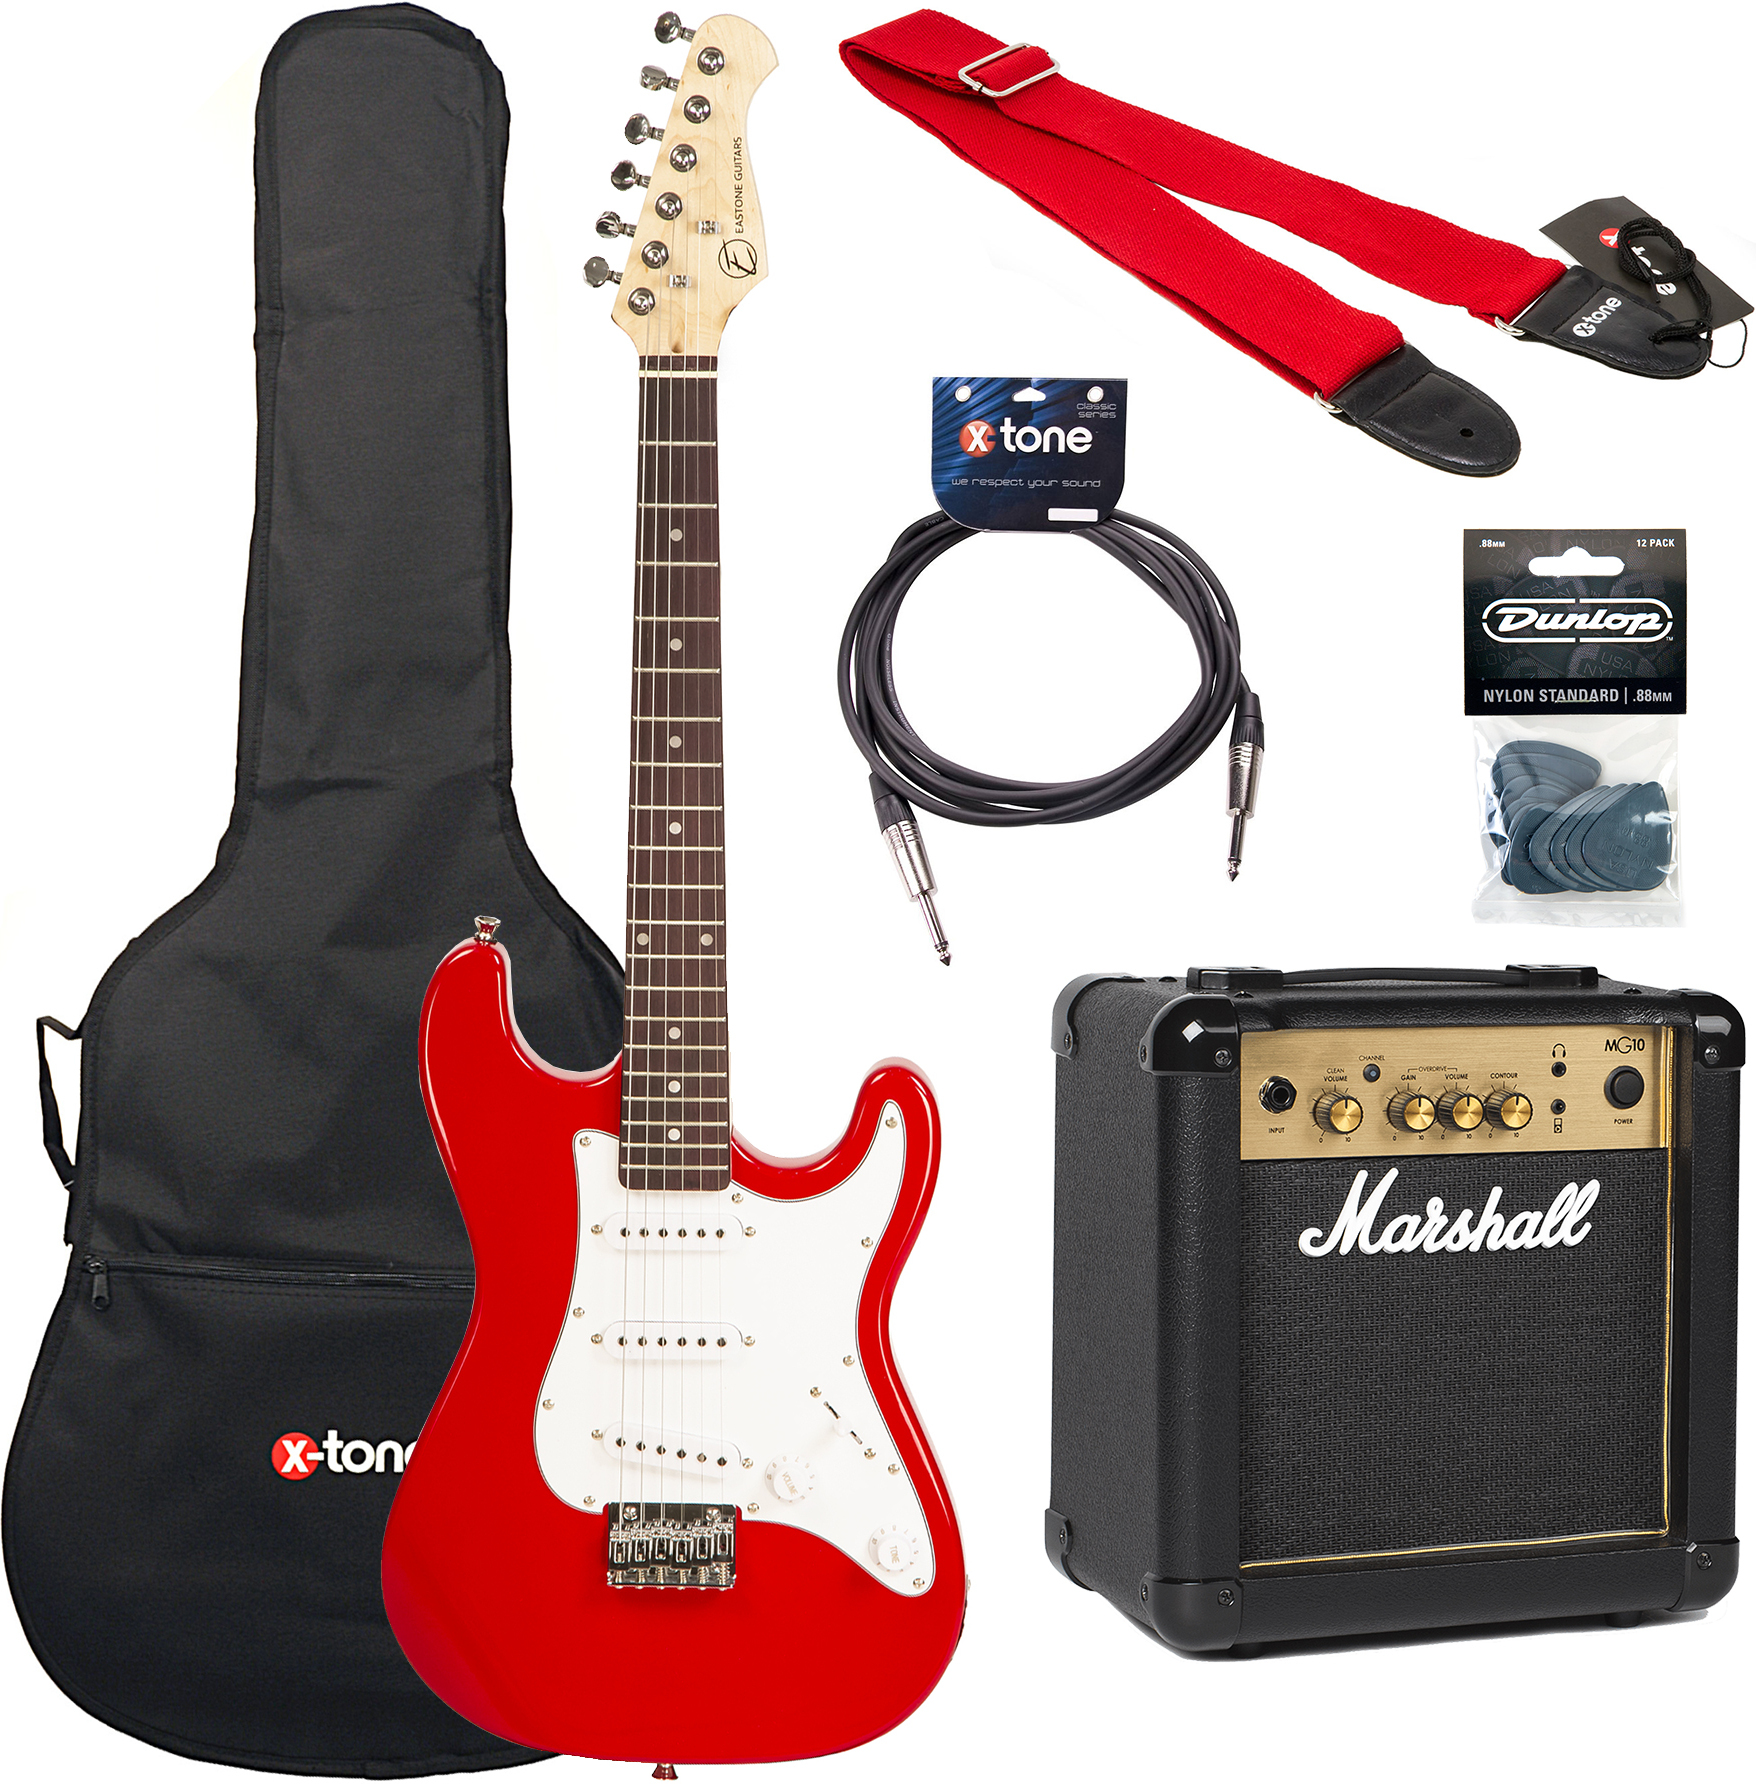 Eastone Str Mini +marshall Mg10g +cable +housse+ Courroie+ Mediators + Mg10g Gold Combo 10 W - Red - Elektrische gitaar set - Main picture